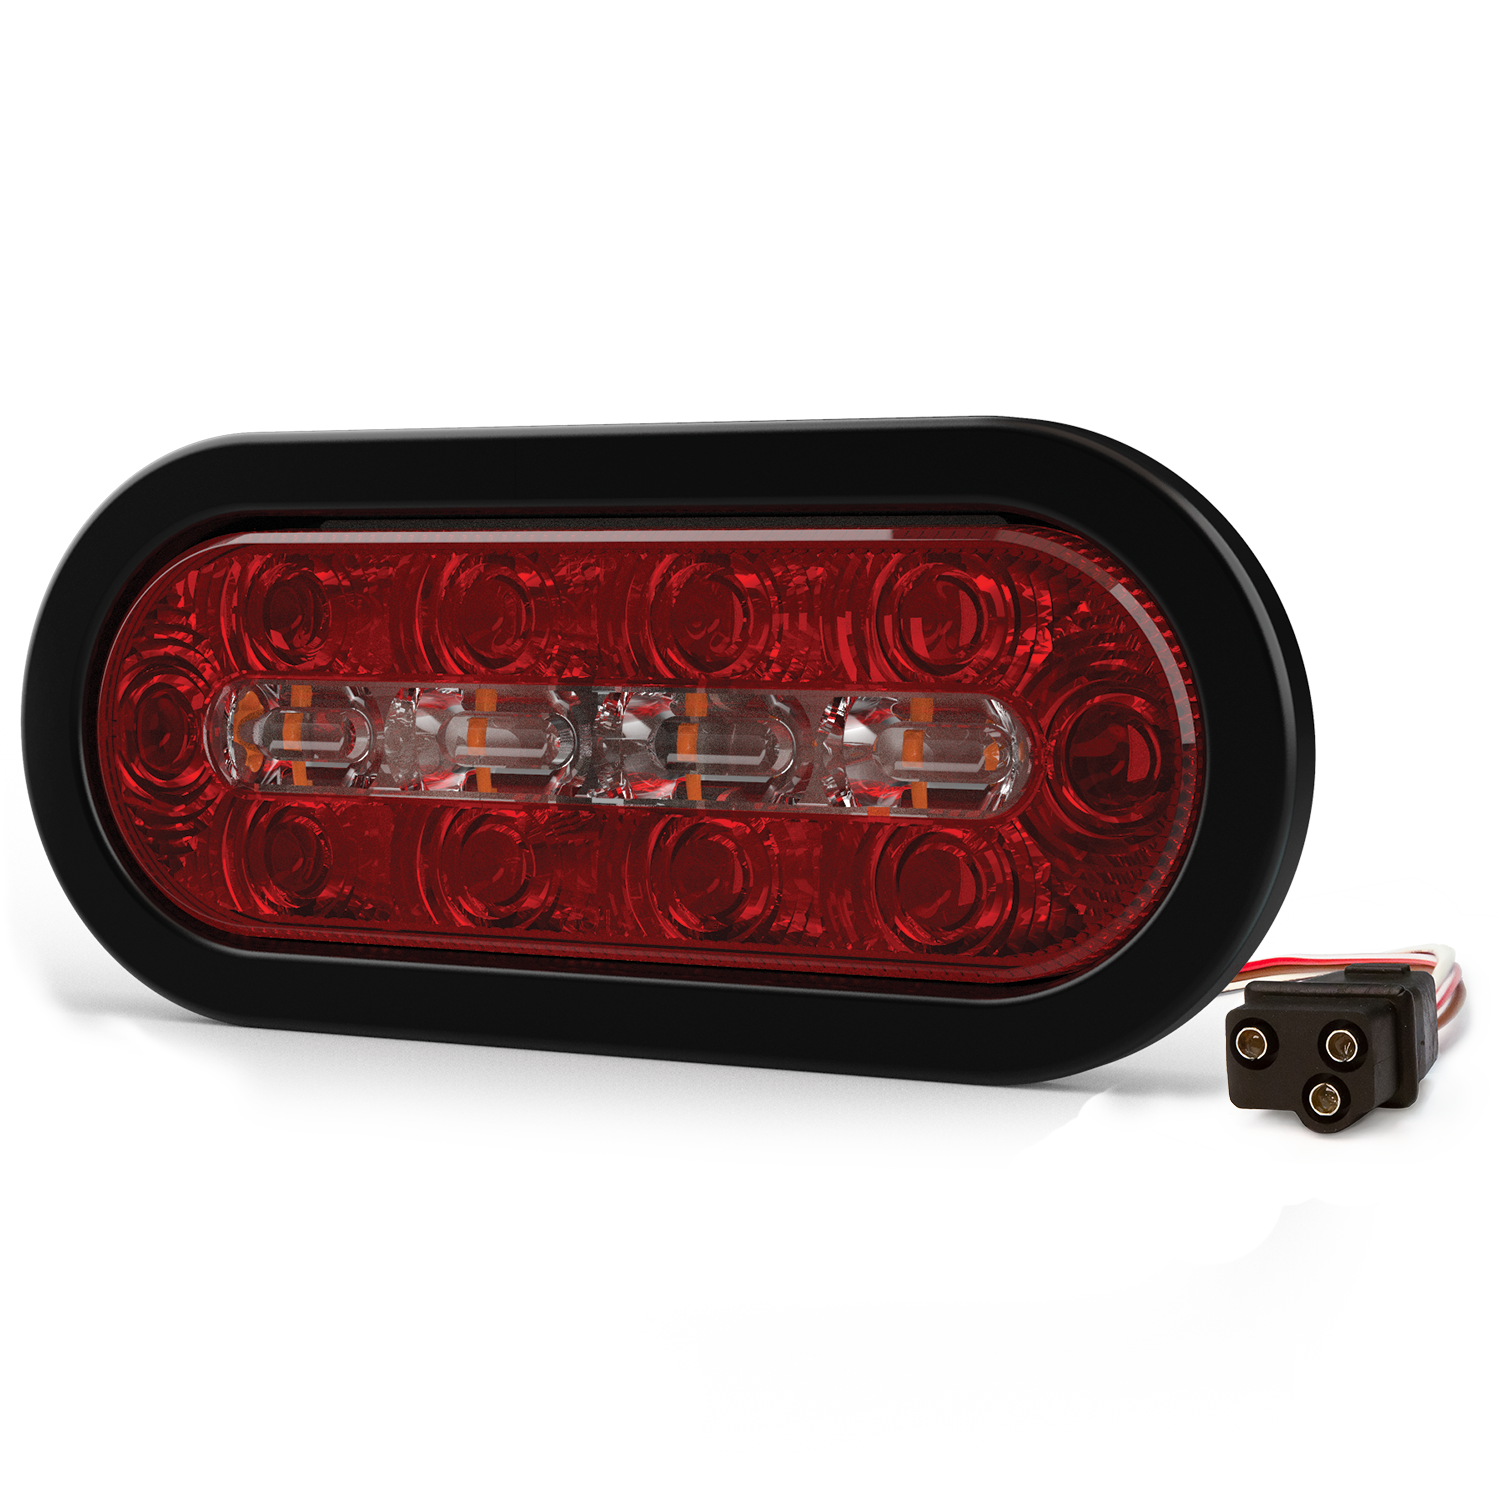 ECO ED3060AW ECCO Stop-Tail-Turn-Reverse LED Warning Light (7.5" Oval, Amber/White, Grommet)